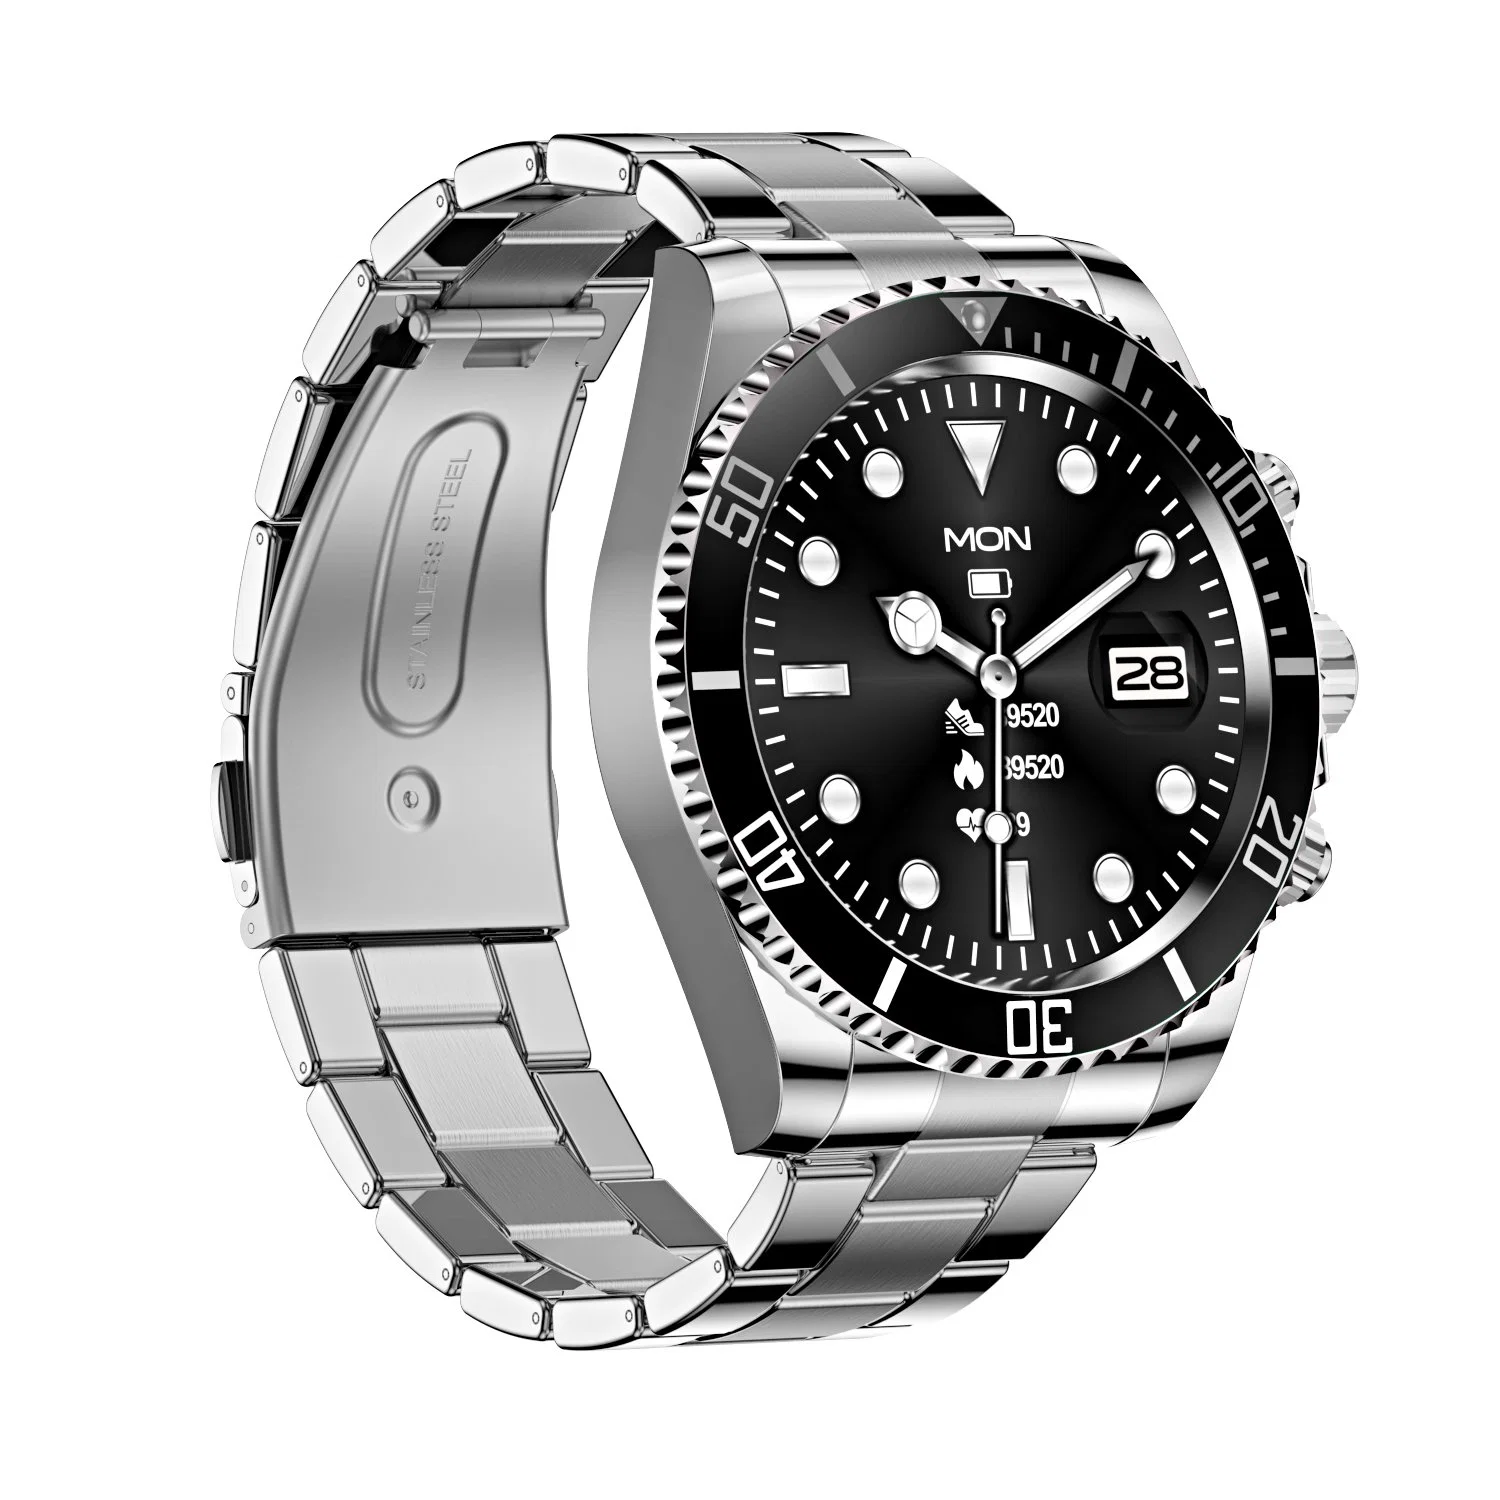 New Watches Similar to Submariner Black Dial Stainless Watch Steel Automatic Men Watch for Aw12